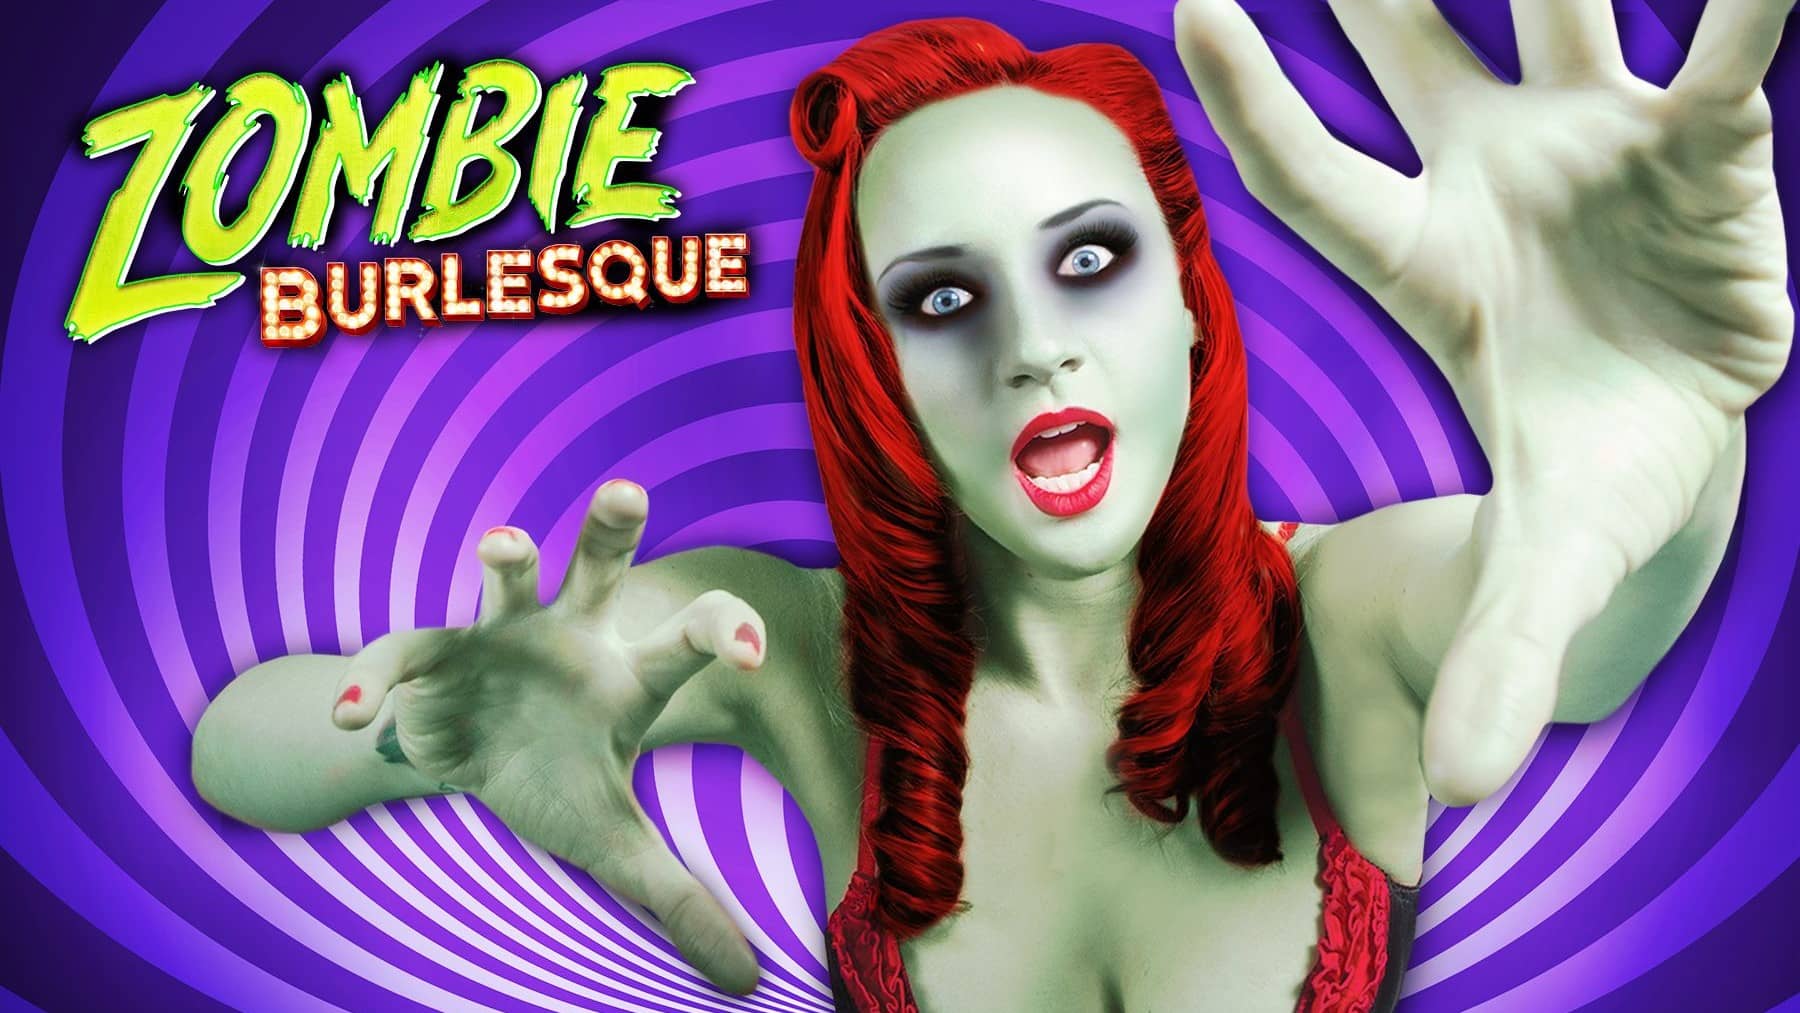 Zombie burlesque woman coming for your brains